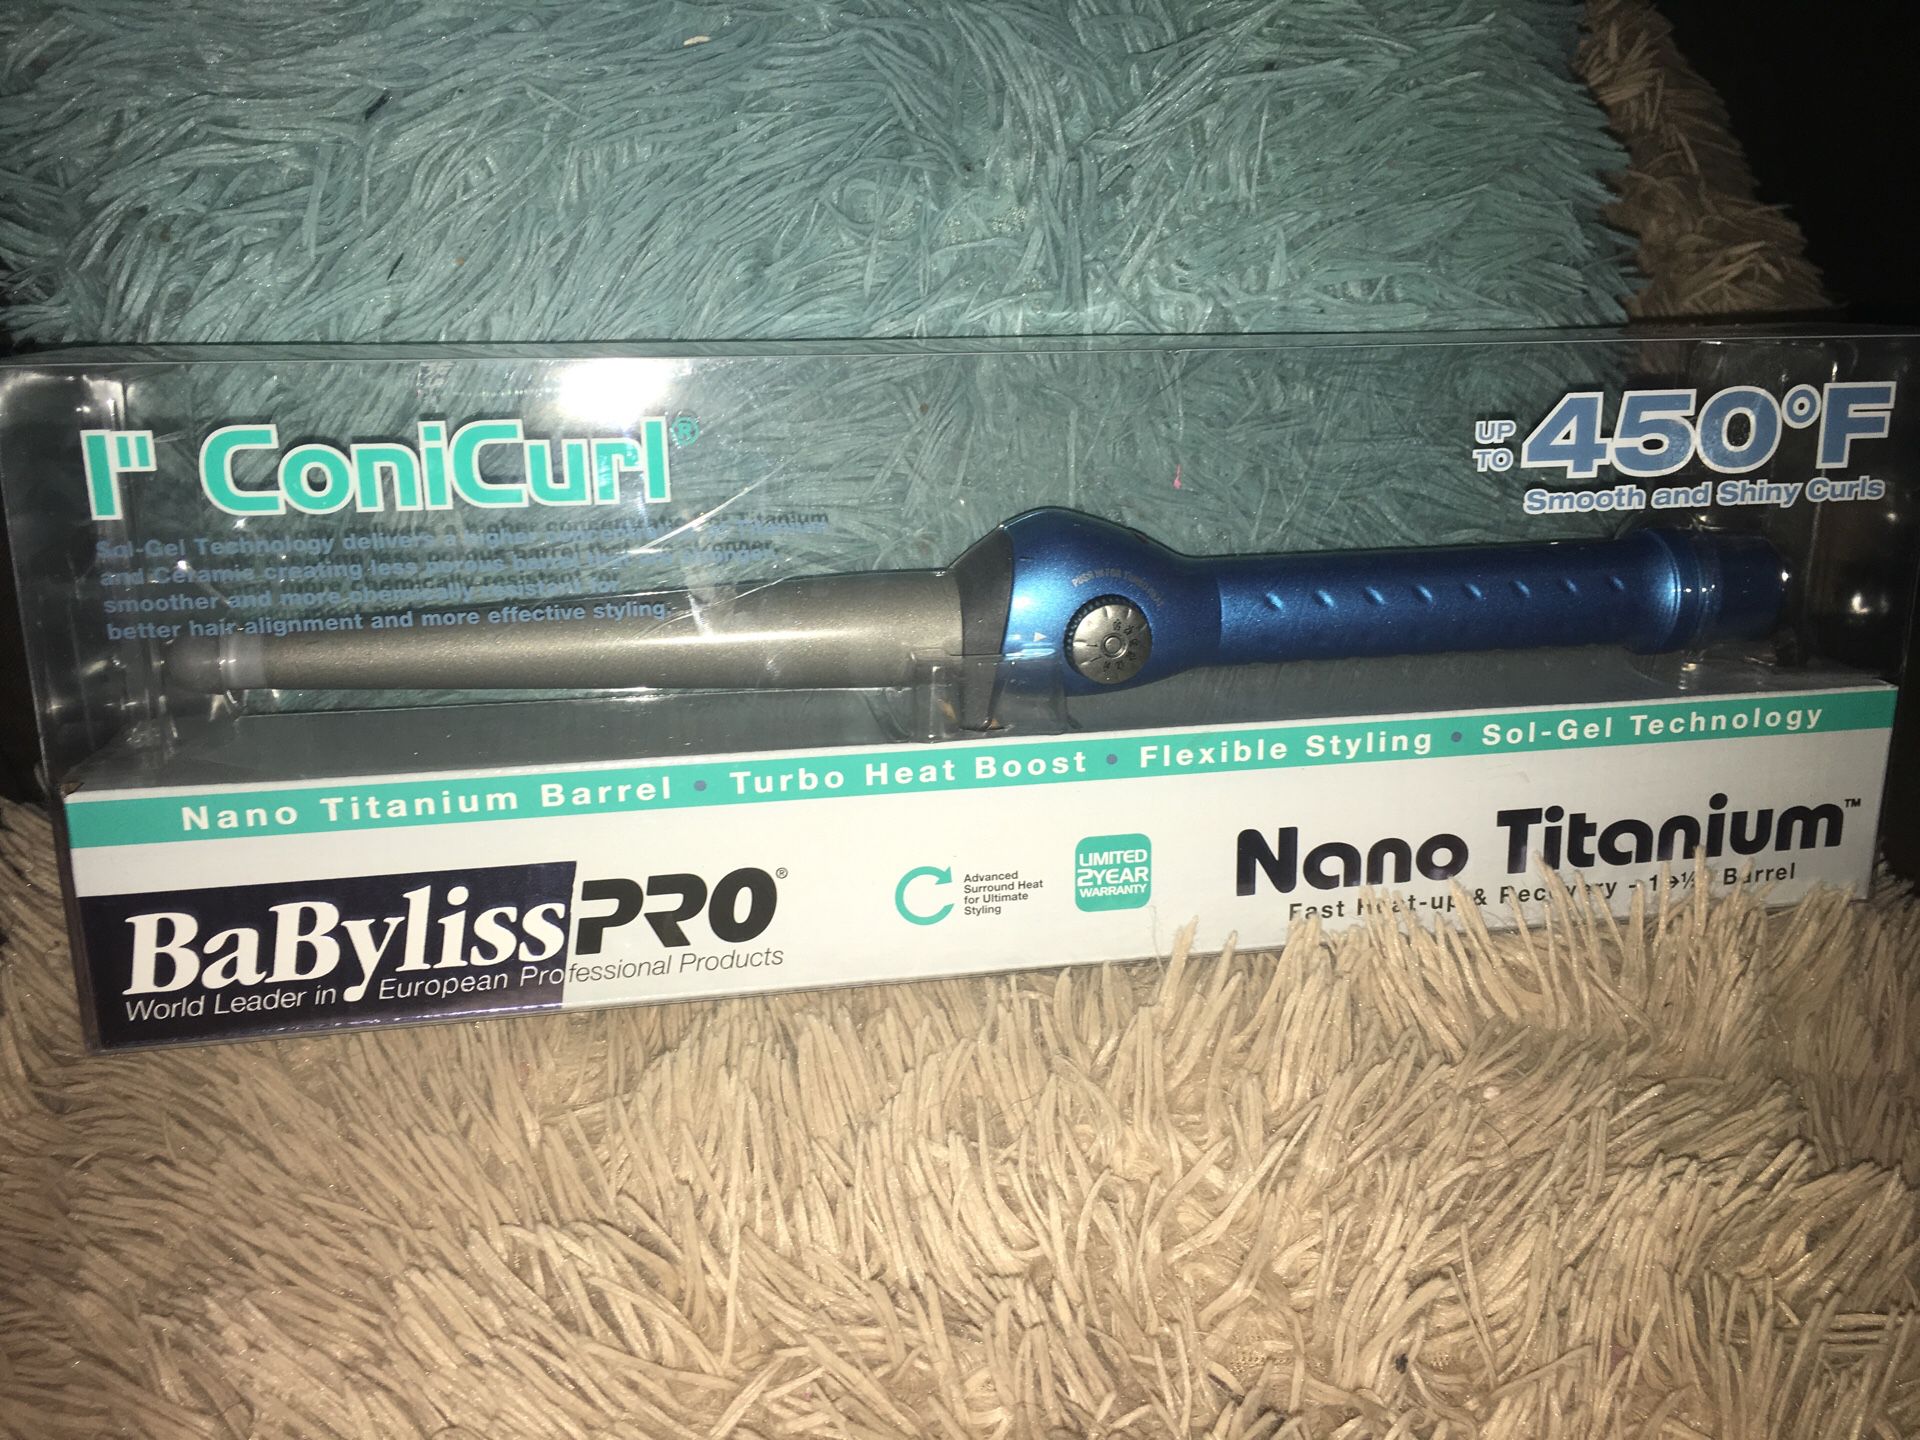 BaByliss curly iron brand new !!